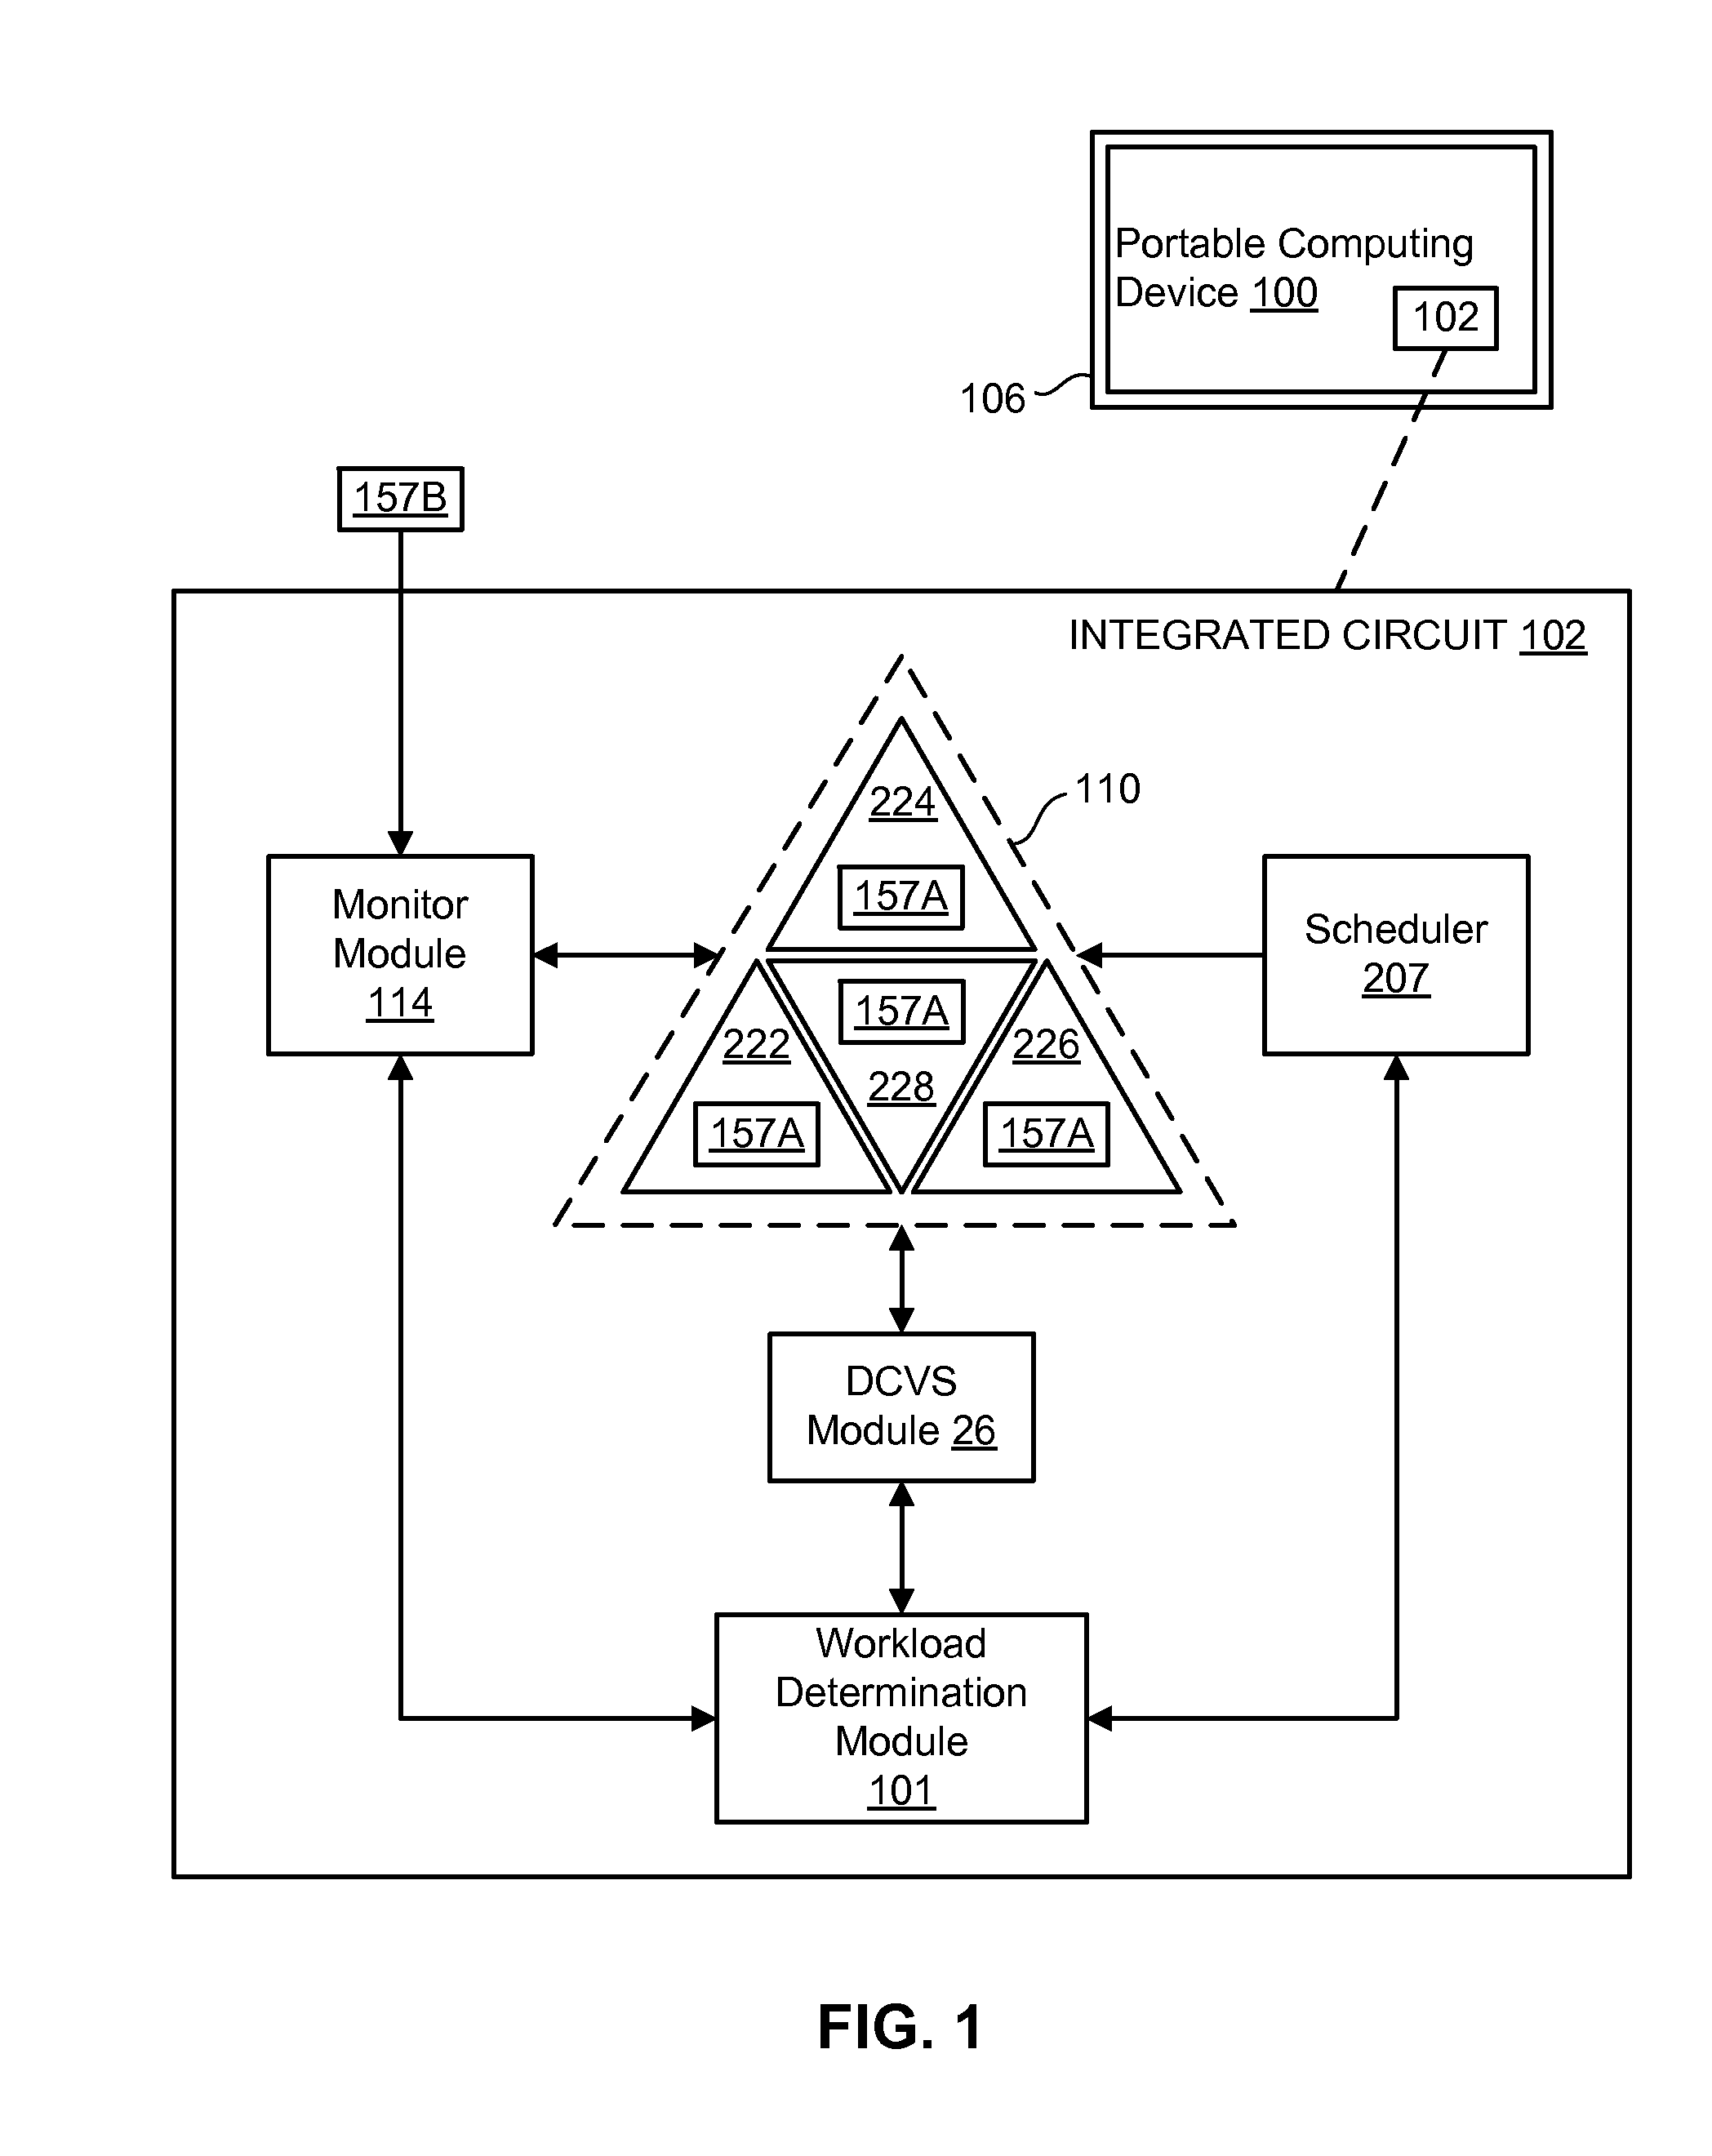 Thermal management in a computing device based on workload detection